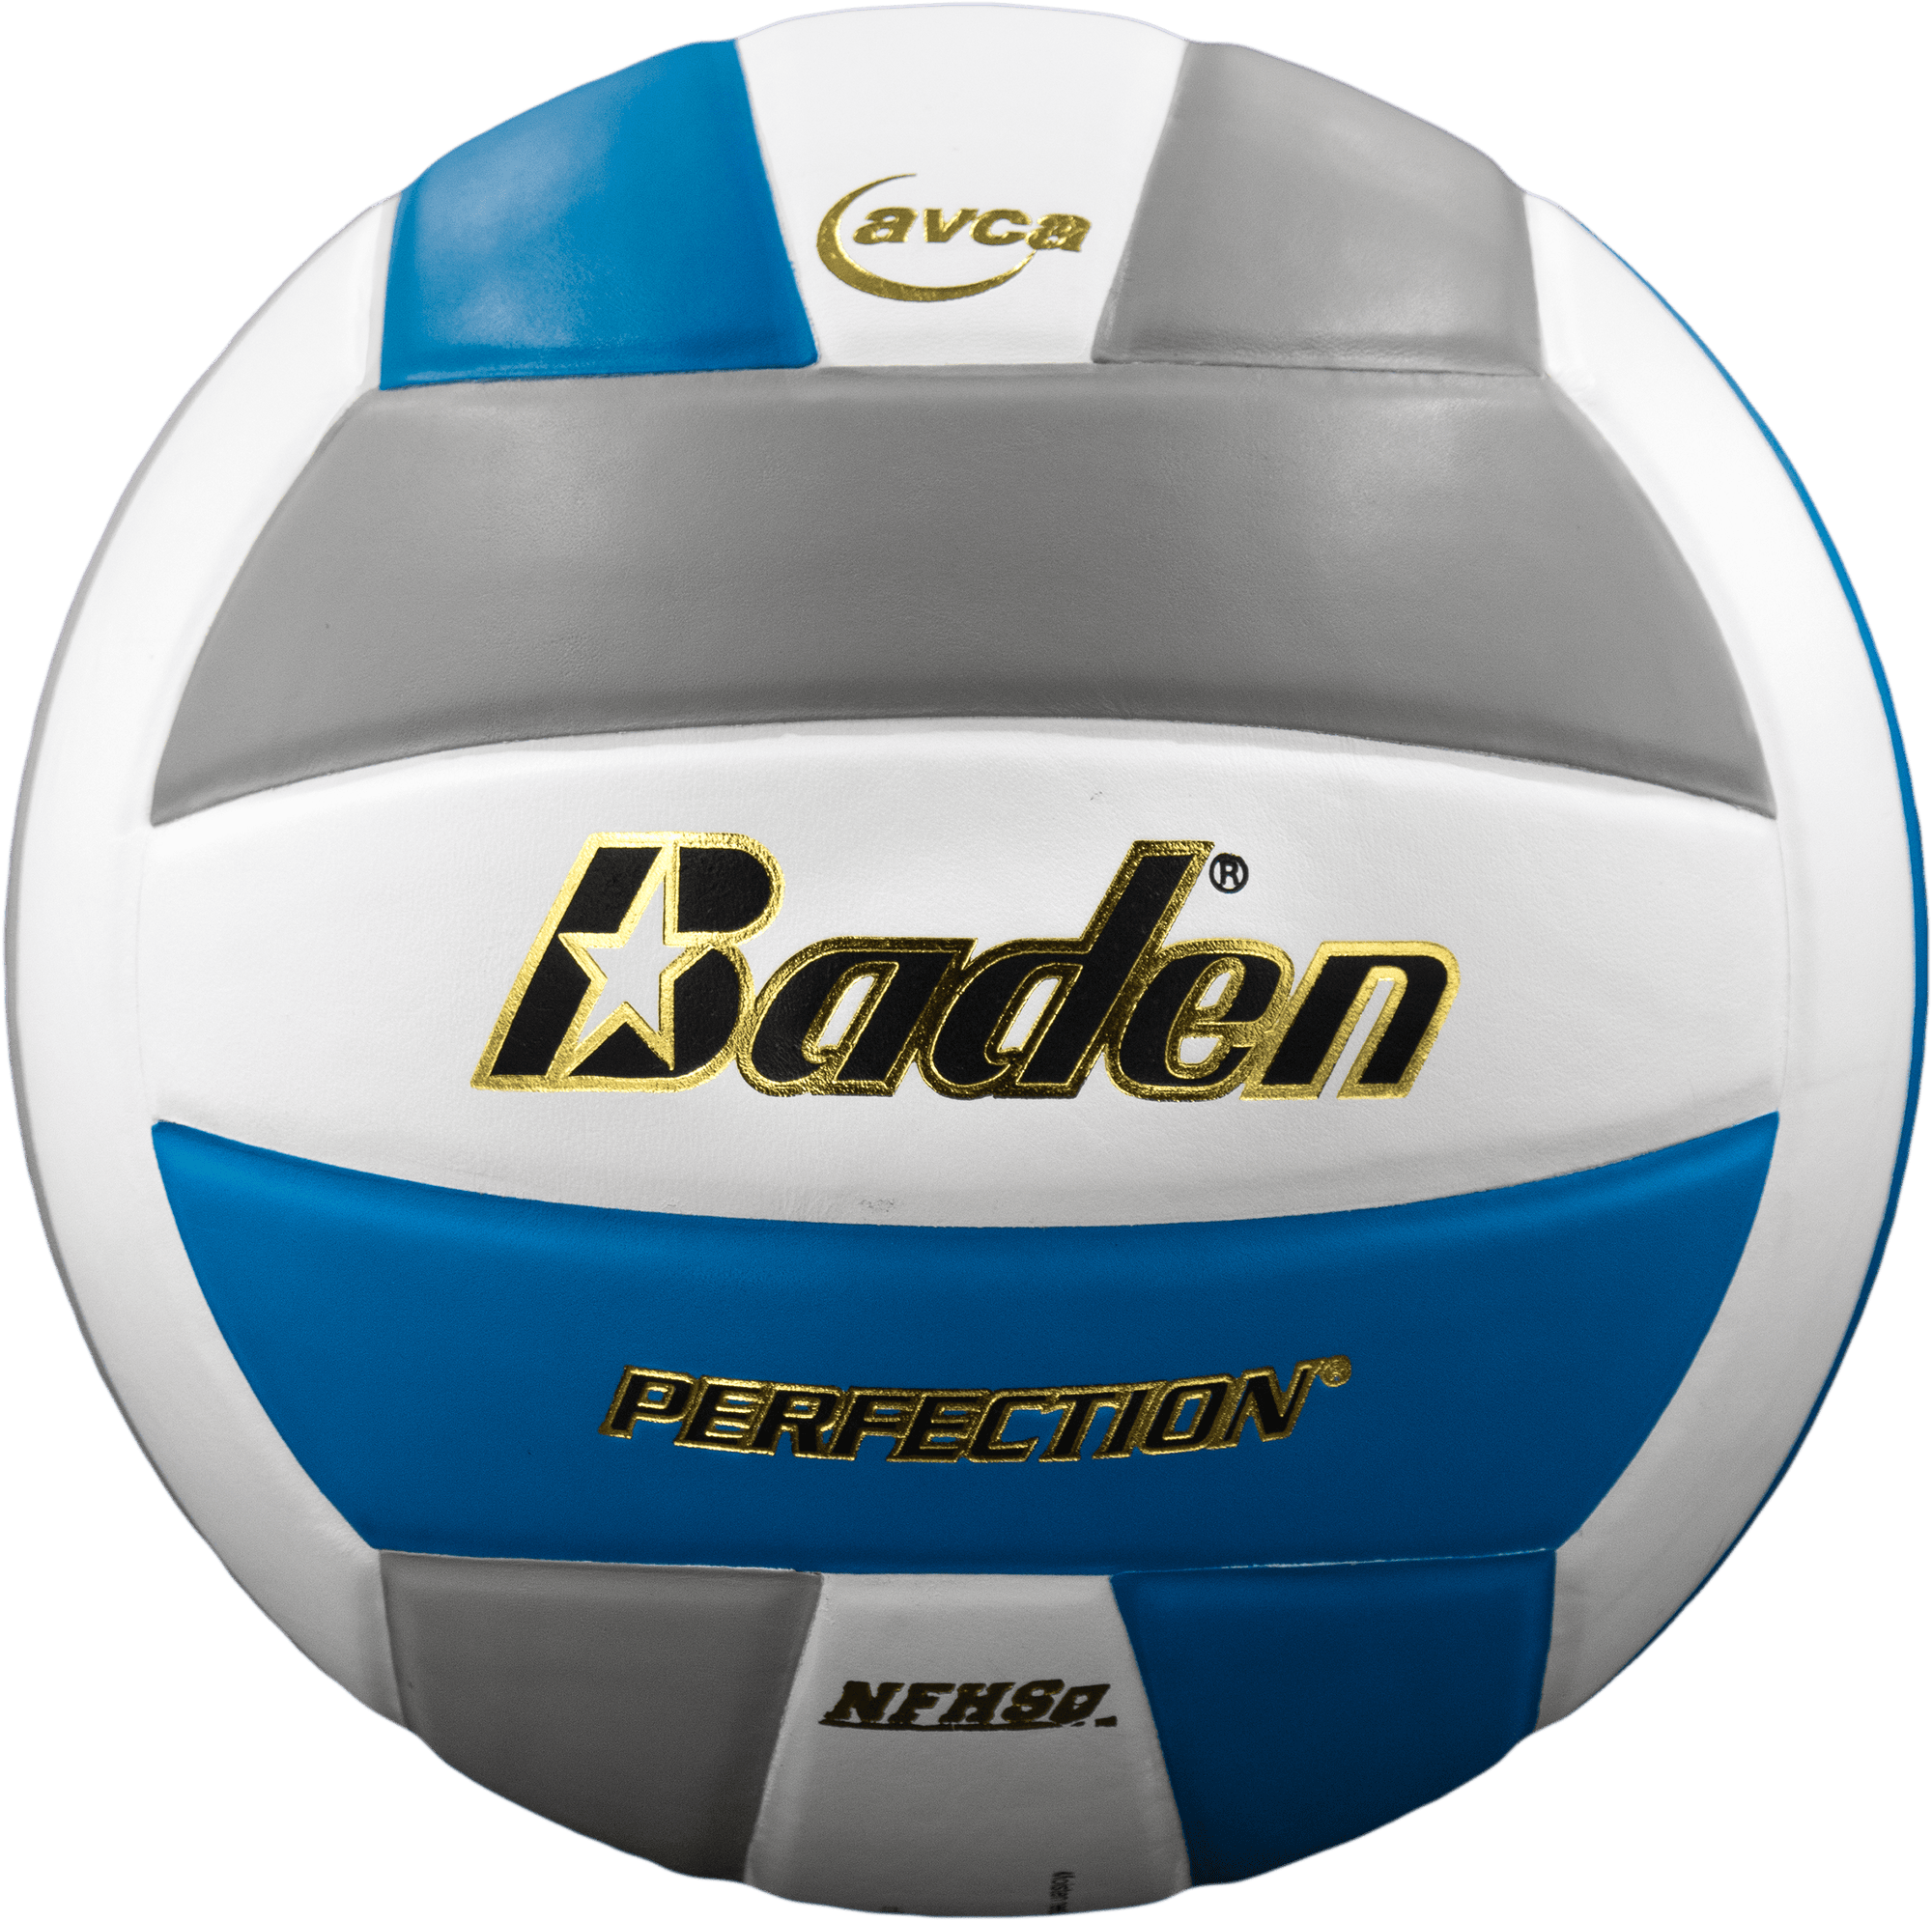 Baden Perfection NFHS Leather Volleyball Equipment Baden Blue/White/Grey  